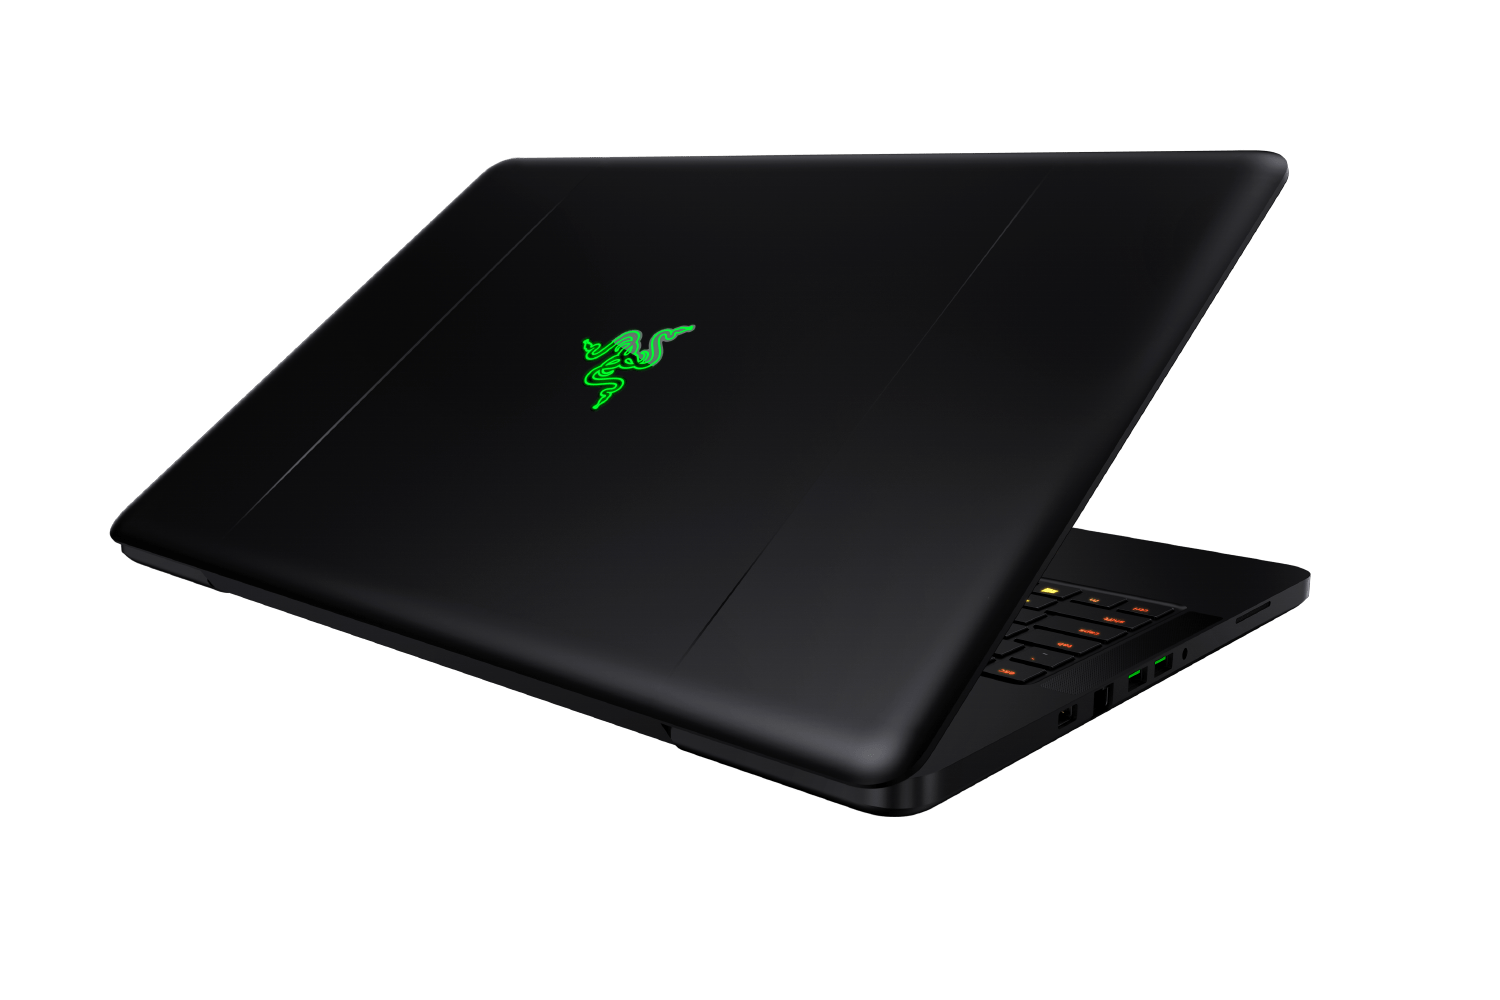 Razer Blade Pro Review: The Top Of The Thin Line